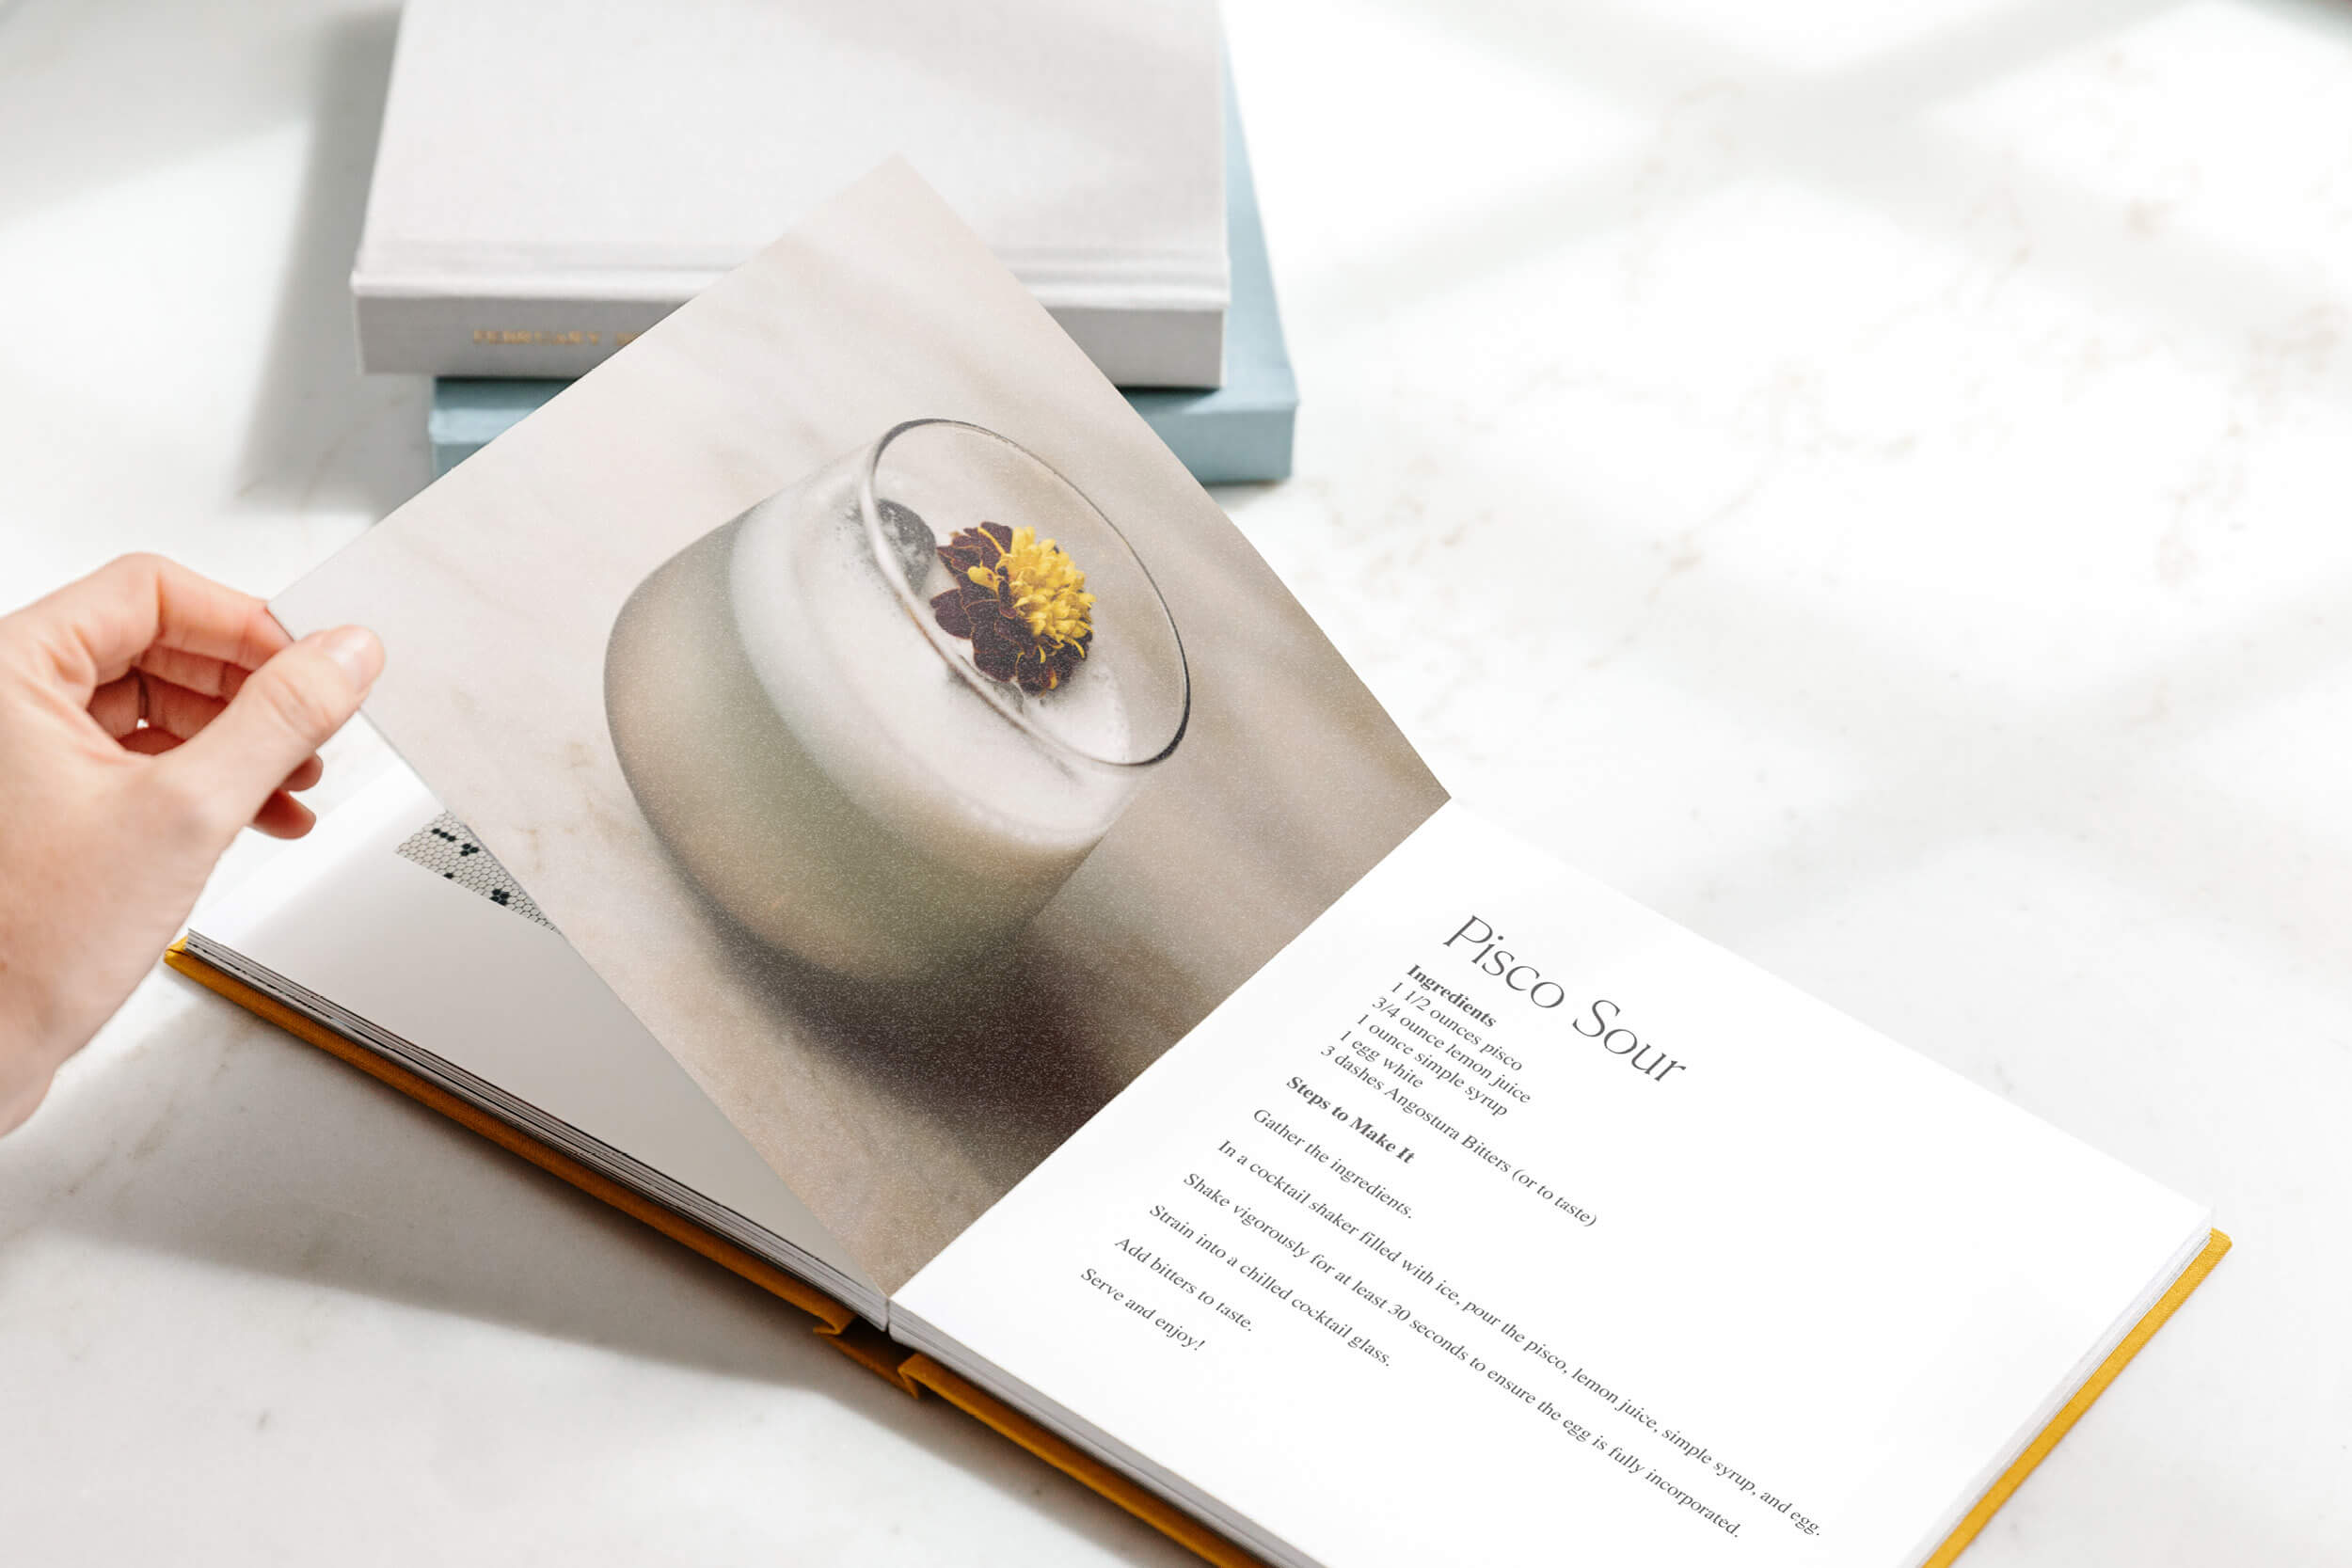 Cocktail book opened to recipe for a pisco sour